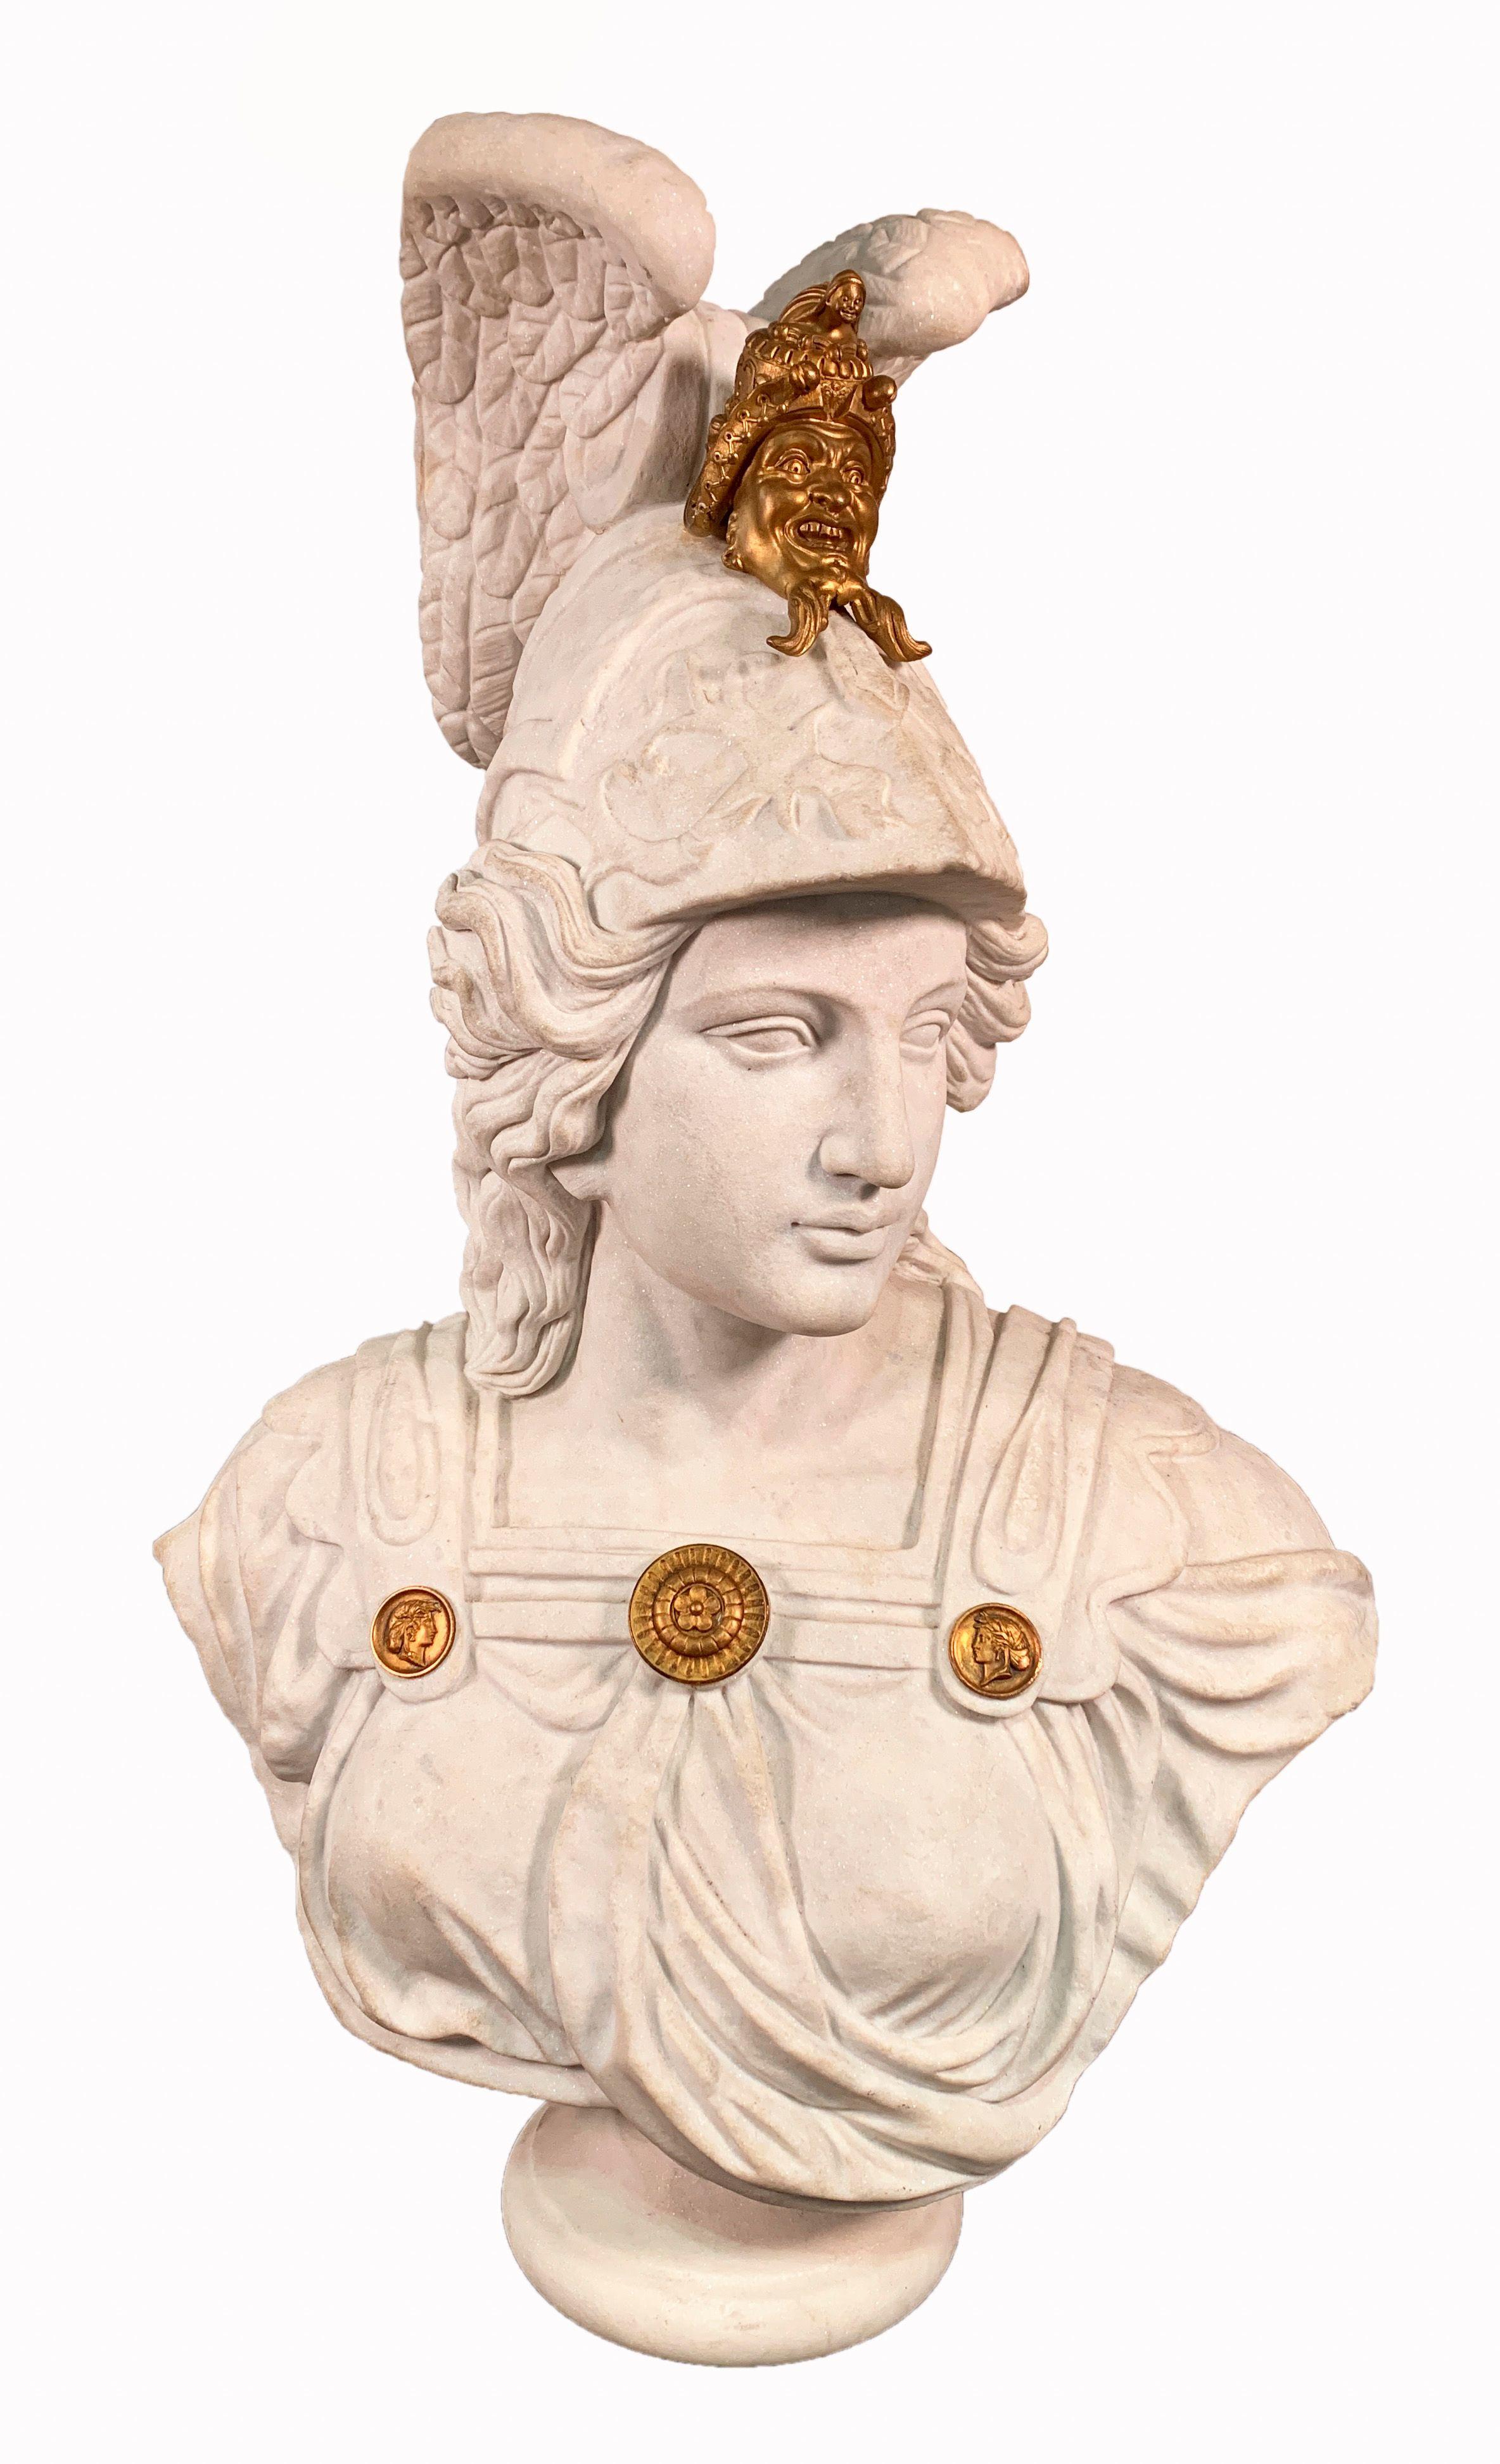 A large Italian hand carved white marble gilt-bronze mounted sculpture - bust of Minerva draped in classical attire, wearing a helmet on a white marble socle.

Dimensions: 
Height: 36